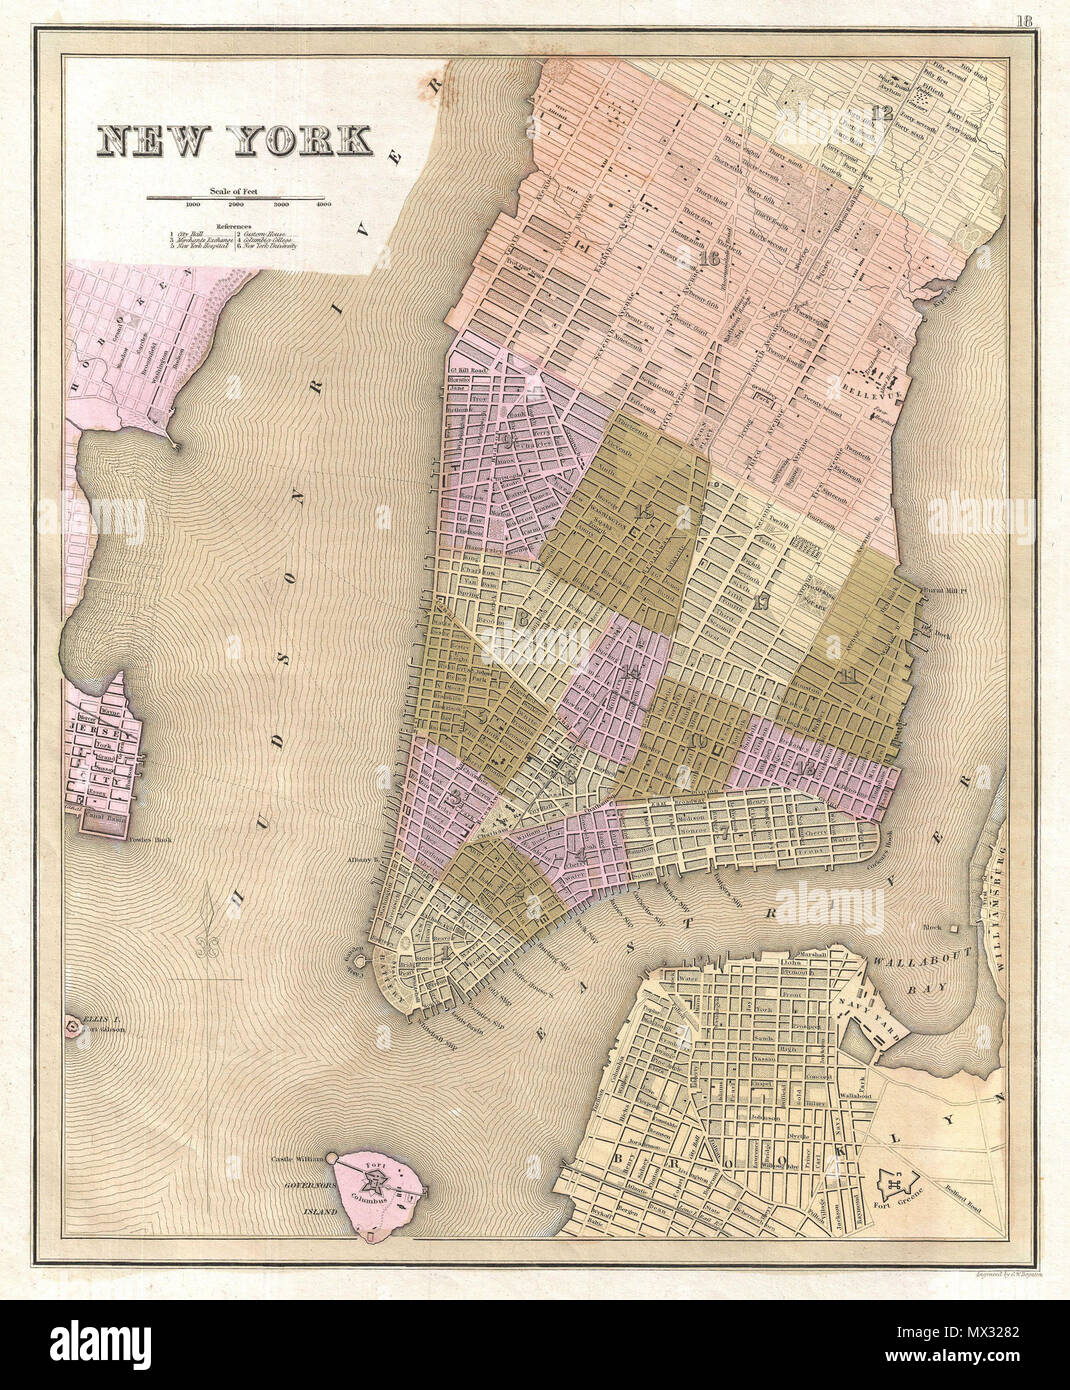 . New York.  English: This is Thomas Bradford's important 1839 map of New York City. Bradford's plan covers Manhattan from fifty-third street to the Battery, with parts of adjacent Brooklyn, Hoboken, and Jersey City. The whole is beautifully engraved in Boynton's delicate style, with important buildings, parks, streets, rail lines, and piers noted. Predates the landfills along the East River and on the Jersey side of the Hudson - though these are in fact ghosted in. Identifies Fort Green, the Navy yard in Brooklyn, Fort Columbus on Governor's Island, Fort Gibson on Ellis Island, City Hall, Bel Stock Photo